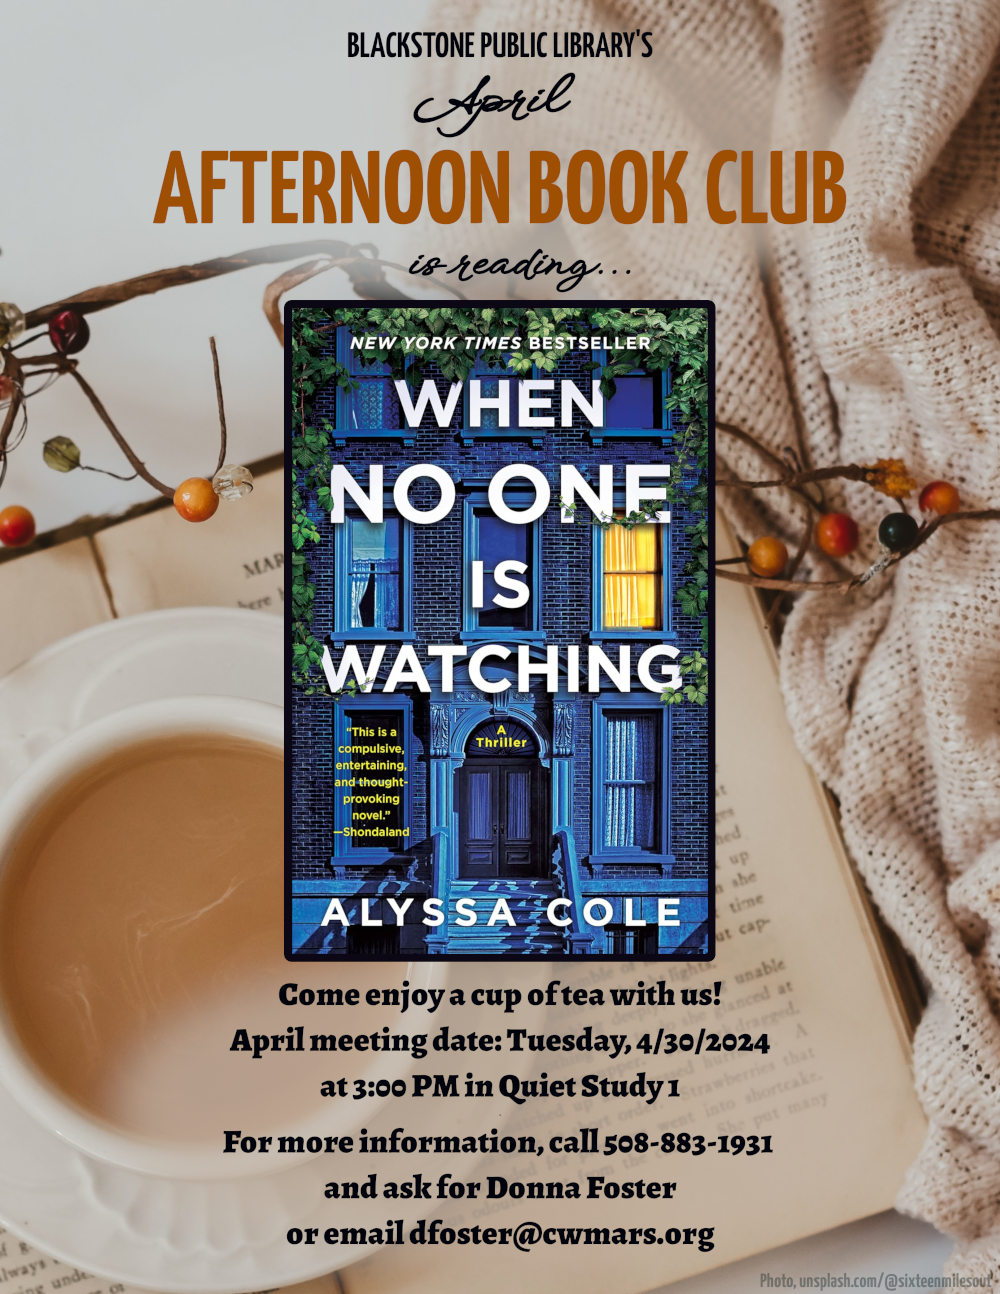 Blackstone Public Library’s April Afternoon Book Club is reading "When No One Is Watching" a thriller by Alyssa Cole.  Come enjoy a cup of tea with us! April meeting date: Tuesday, 4/30/2024 at 3:00 PM in Quiet Study 1.  Image description: The title text is in a bold white sans-serif font over the image of a three-story brick apartment building. The building is in blue evening light, with all of the windows dark except for one which is lit from within. Around the title text there is a border of green ivy vines. Smaller quoted text reads, "This is a compulsive, entertaining, and thought-provoking novel," quoted to Shondaland.  For more information, call 508-883-1931 and ask for Donna Foster, or email dfoster@cwmars.org.